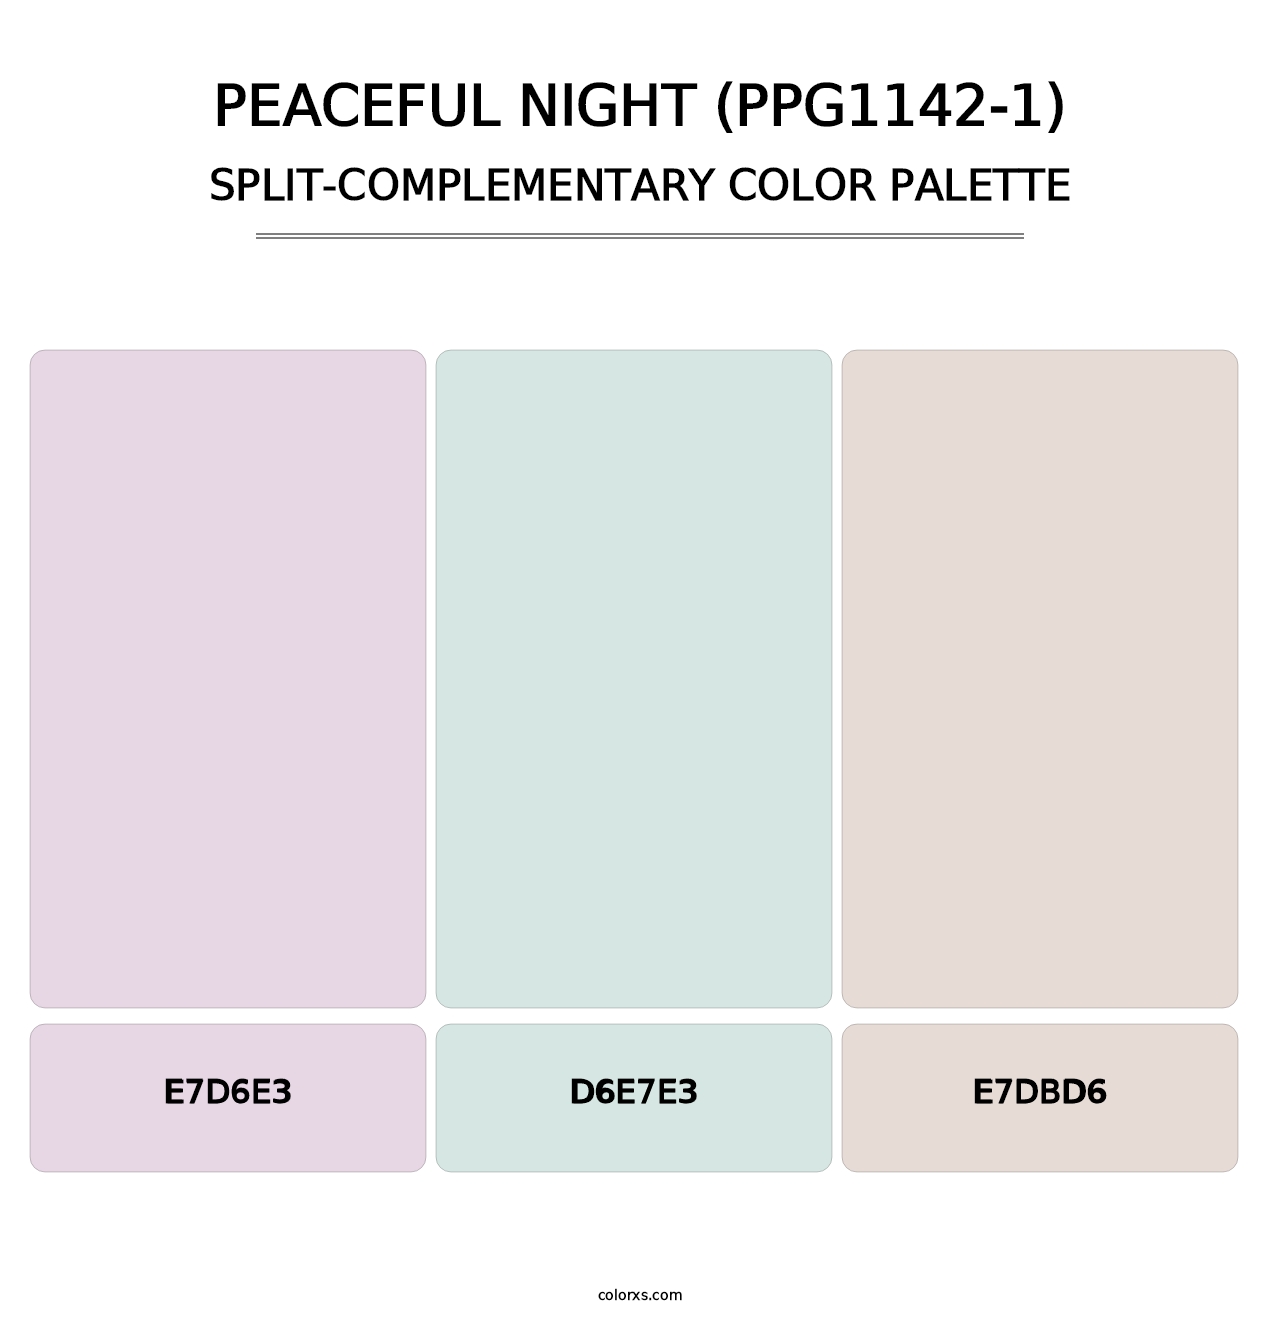 Peaceful Night (PPG1142-1) - Split-Complementary Color Palette